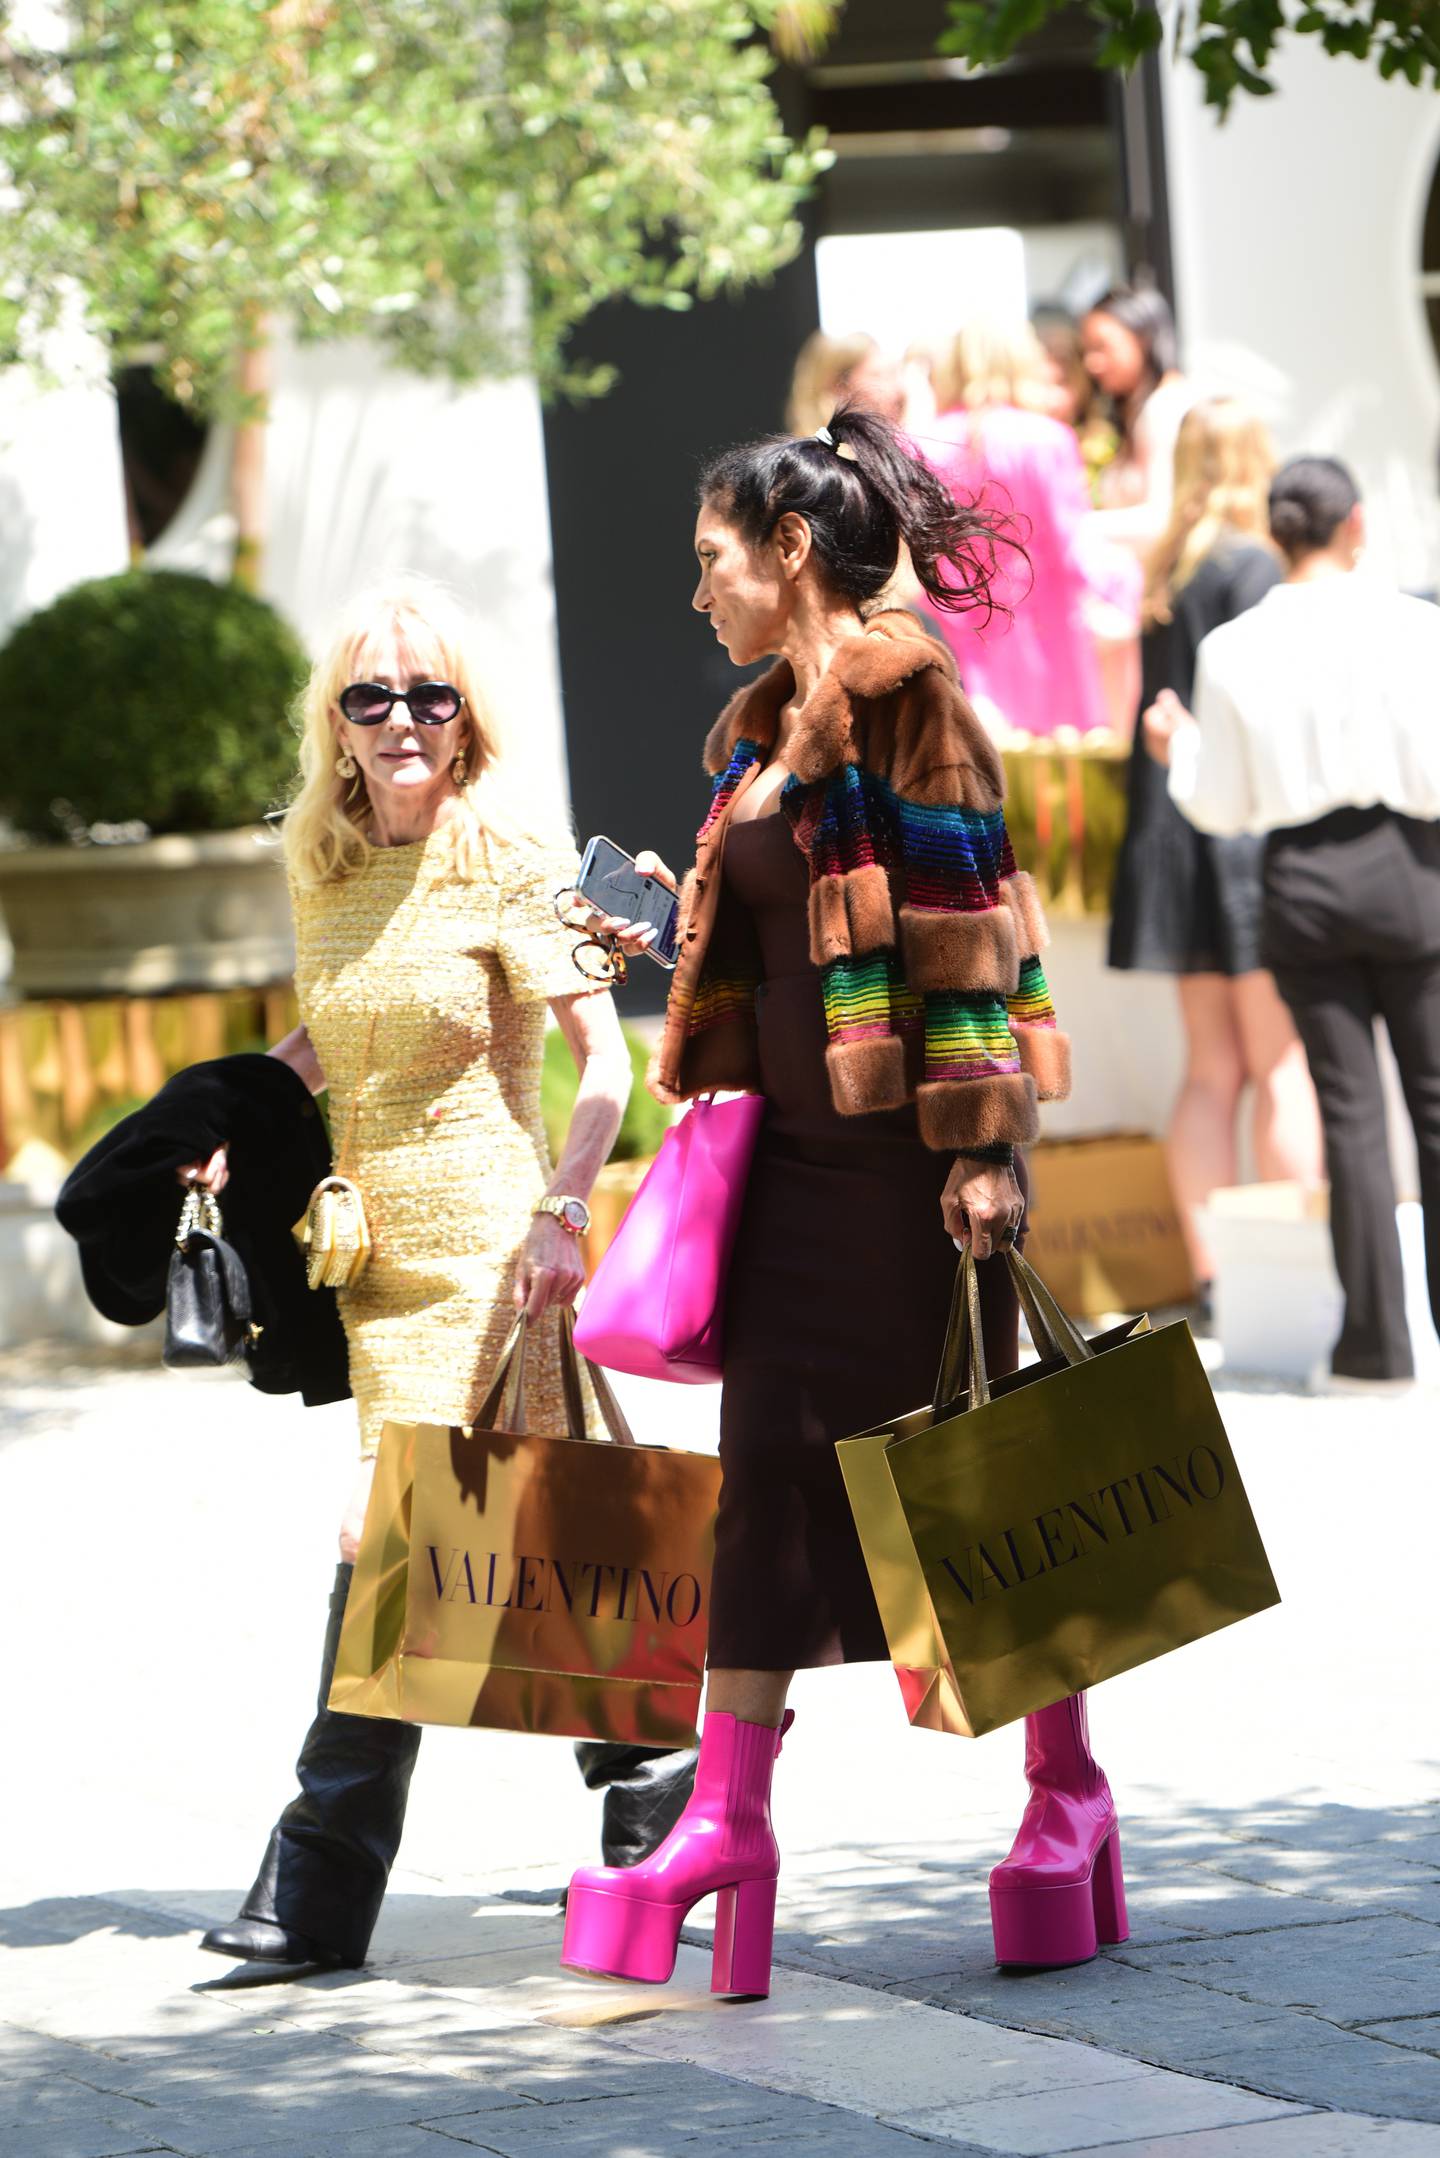 Two women shopping in Los Angeles holding Valentino bags.